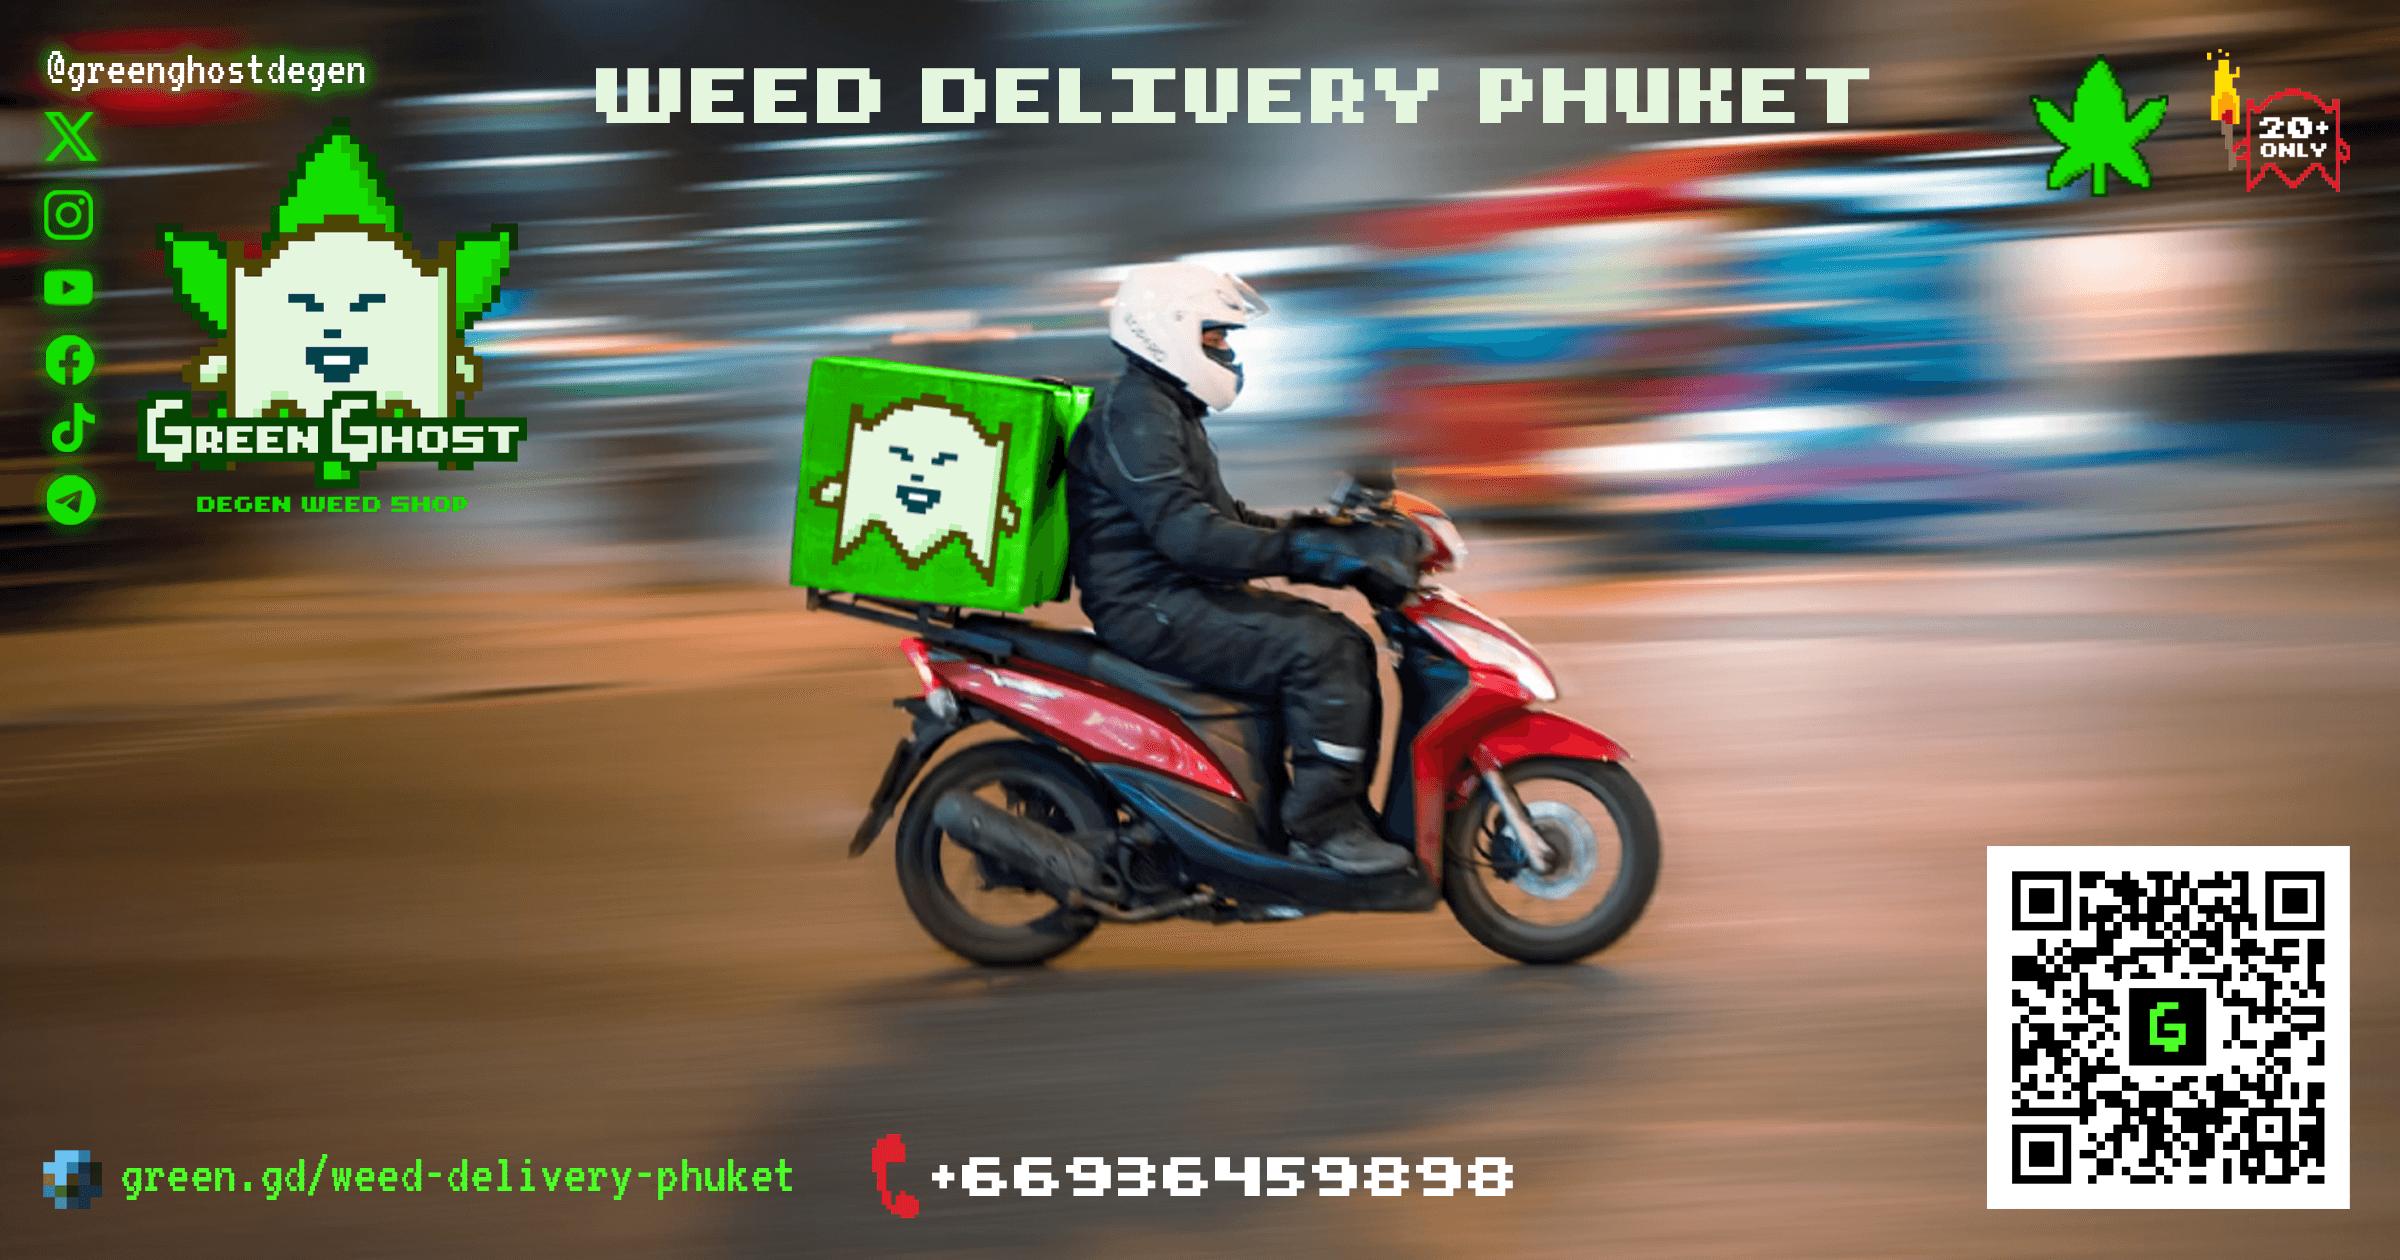 Contact us - Weed delivery Phuket - Buy weed online.